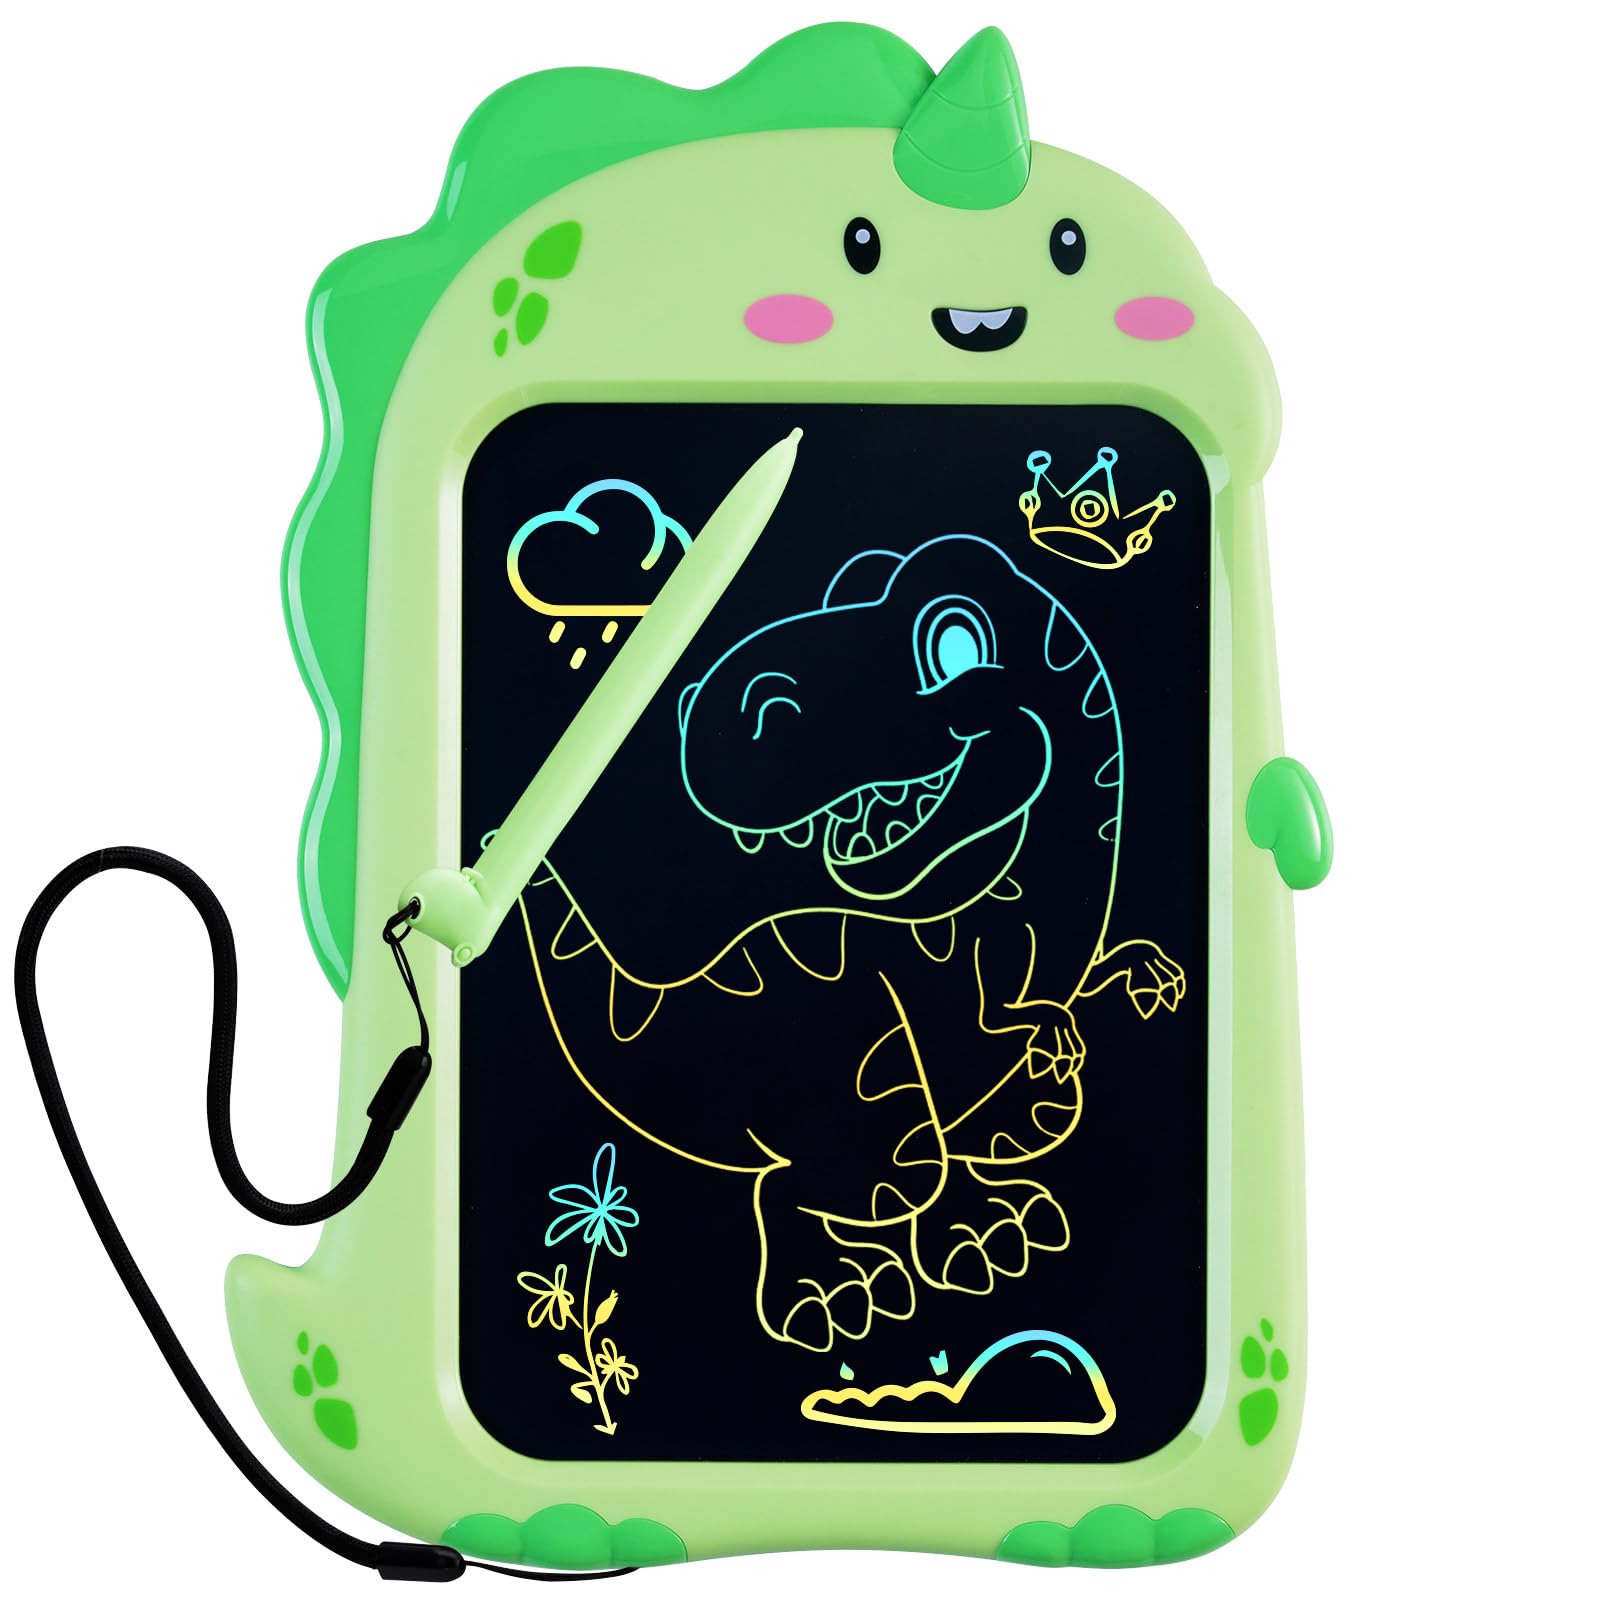 LCD Writing Tablet Kids Toys